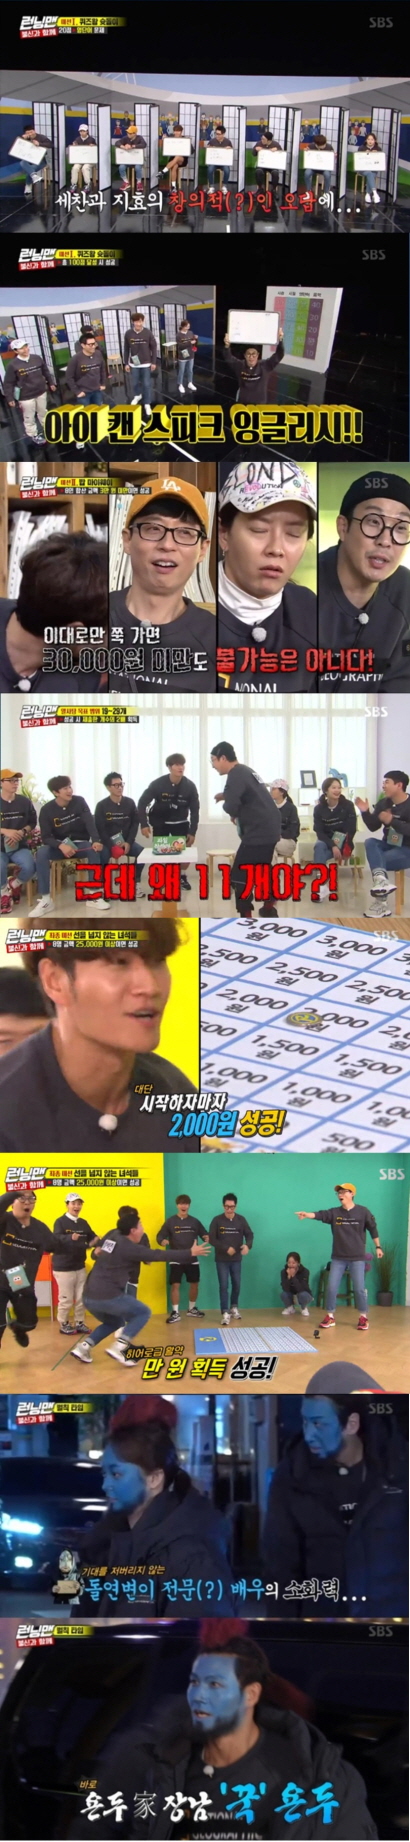 Running Man kept the top spot in the same time zone of 2049 target TV viewer ratings.SBS entertainment Running Man, which was broadcast on the 1st, was ranked # 1 in the same time zone entertainment with 4.1% of 2049 target TV viewer ratings (Nilson Korea metropolitan area furniture viewer ratings, part 2) overtaking Masked Wang and Presidents ear is donkey ear.The average TV viewer ratings were 5.5% in the first part and 7.6% in the second part, while the highest TV viewer ratings per minute soared to 8.4%.The broadcast was featured in a special unitary race With Disbelief, which was set up for members who had been in a lot of doubt and framing over the past few weeks.The first mission, The King of Quiz had to be unanimously correct: all kinds of fouls and Jeon So-mins wrong answers came out, but all the correct answers came out.In the second mission Bob My Way, Jeon So-min was prominent.One of the eight different menus with different prices was private, and if the sum was less than 30,000 won, it was a power pass.While Ji Seok-jin chose a high-priced soy sauce, Jeon So-min chose boiled eggs and all the members ate well.On the other hand, the third mission Category Answer that succeeded when all the people said the category presented in 8 seconds failed, and once again the distrust of the members raised their heads and laughed.Fortunately, in the final mission The Guys who do not cross the line, Yang Se-chan won the 10,000 won in his performance and got a good feeling.Yang Se-chan won the penalty exemption by ranking first by member, and the penalty was confirmed when Jeon So-min and Lee Kwang-soo were ranked 7th and 8th.The penalists Jeon So-min and Lee Kwang-soo had to sell Bungeo-pang on the street with the Running Man-pyo Megahit makeup Yondu makeup, and pointed out Kim Jong-kook as additional penalties.The three humiliation sales sites rose to 8.4% of the highest TV viewer ratings per minute, accounting for the best one minute.Running Man is broadcast every Sunday at 5 p.m.Photo = SBS Broadcasting Screen